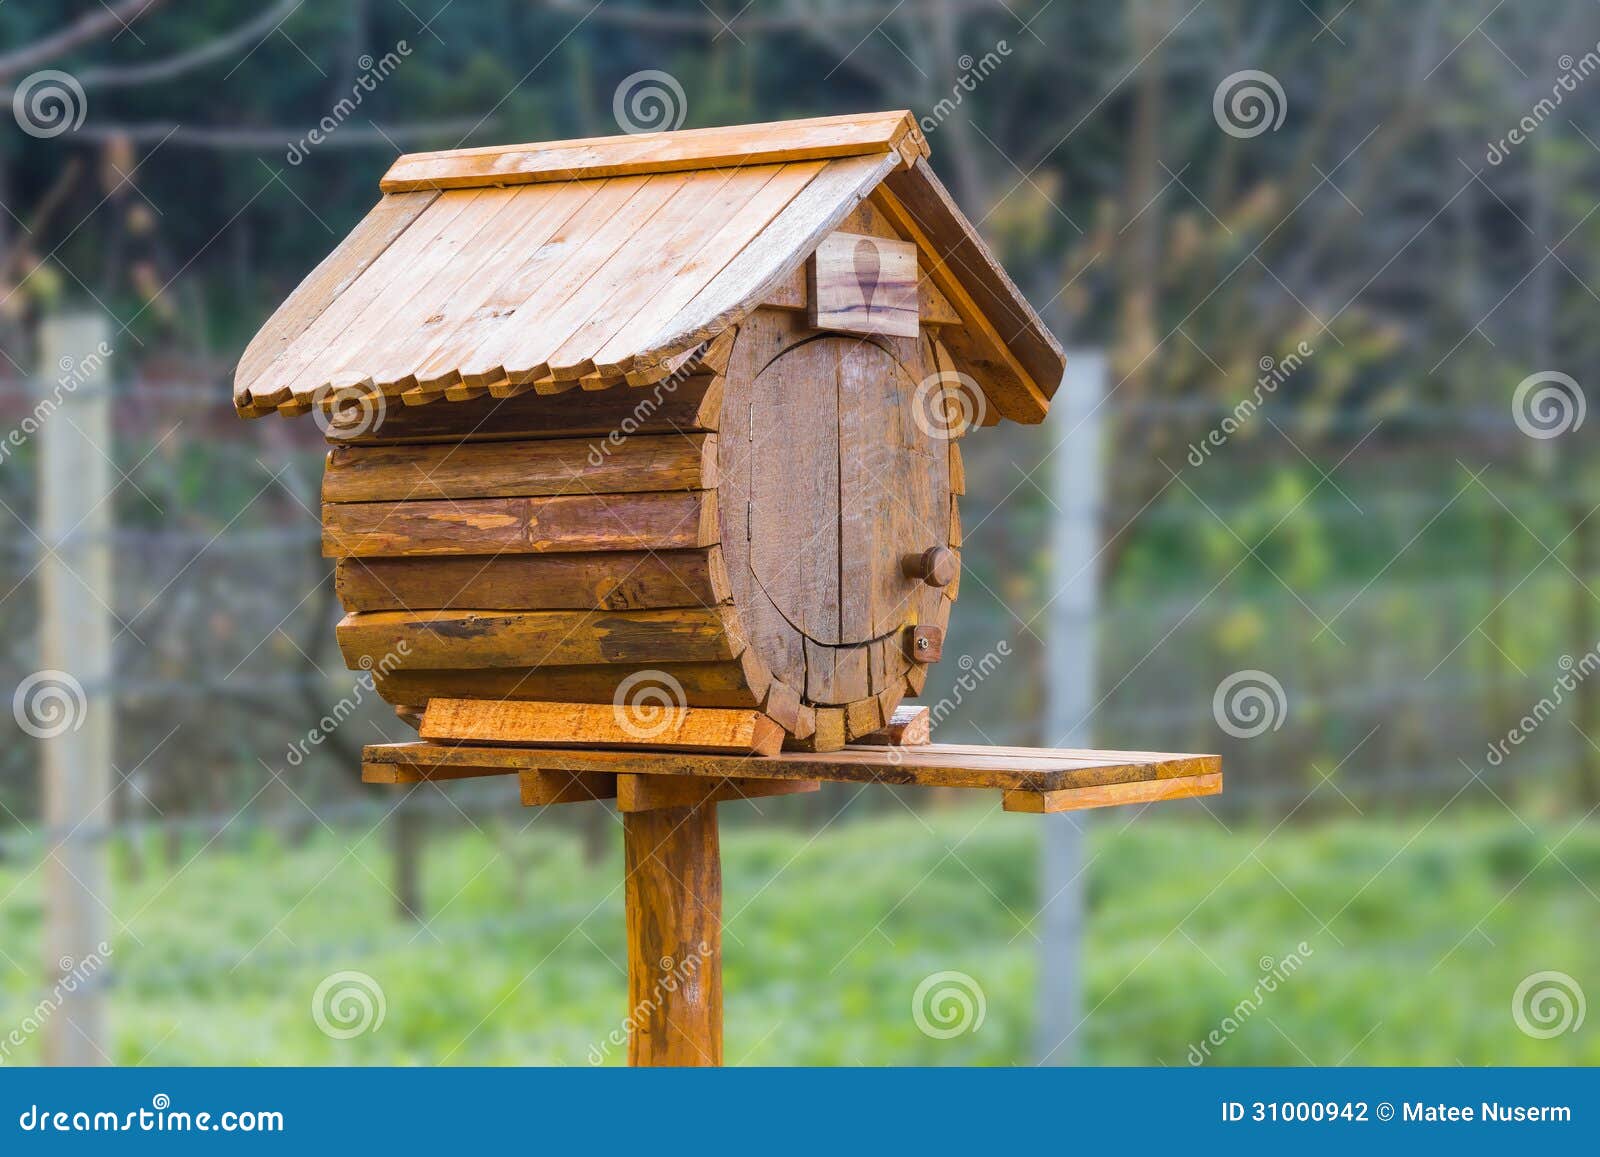 Birdhouse or homemade wooden mailbox with clipping path.